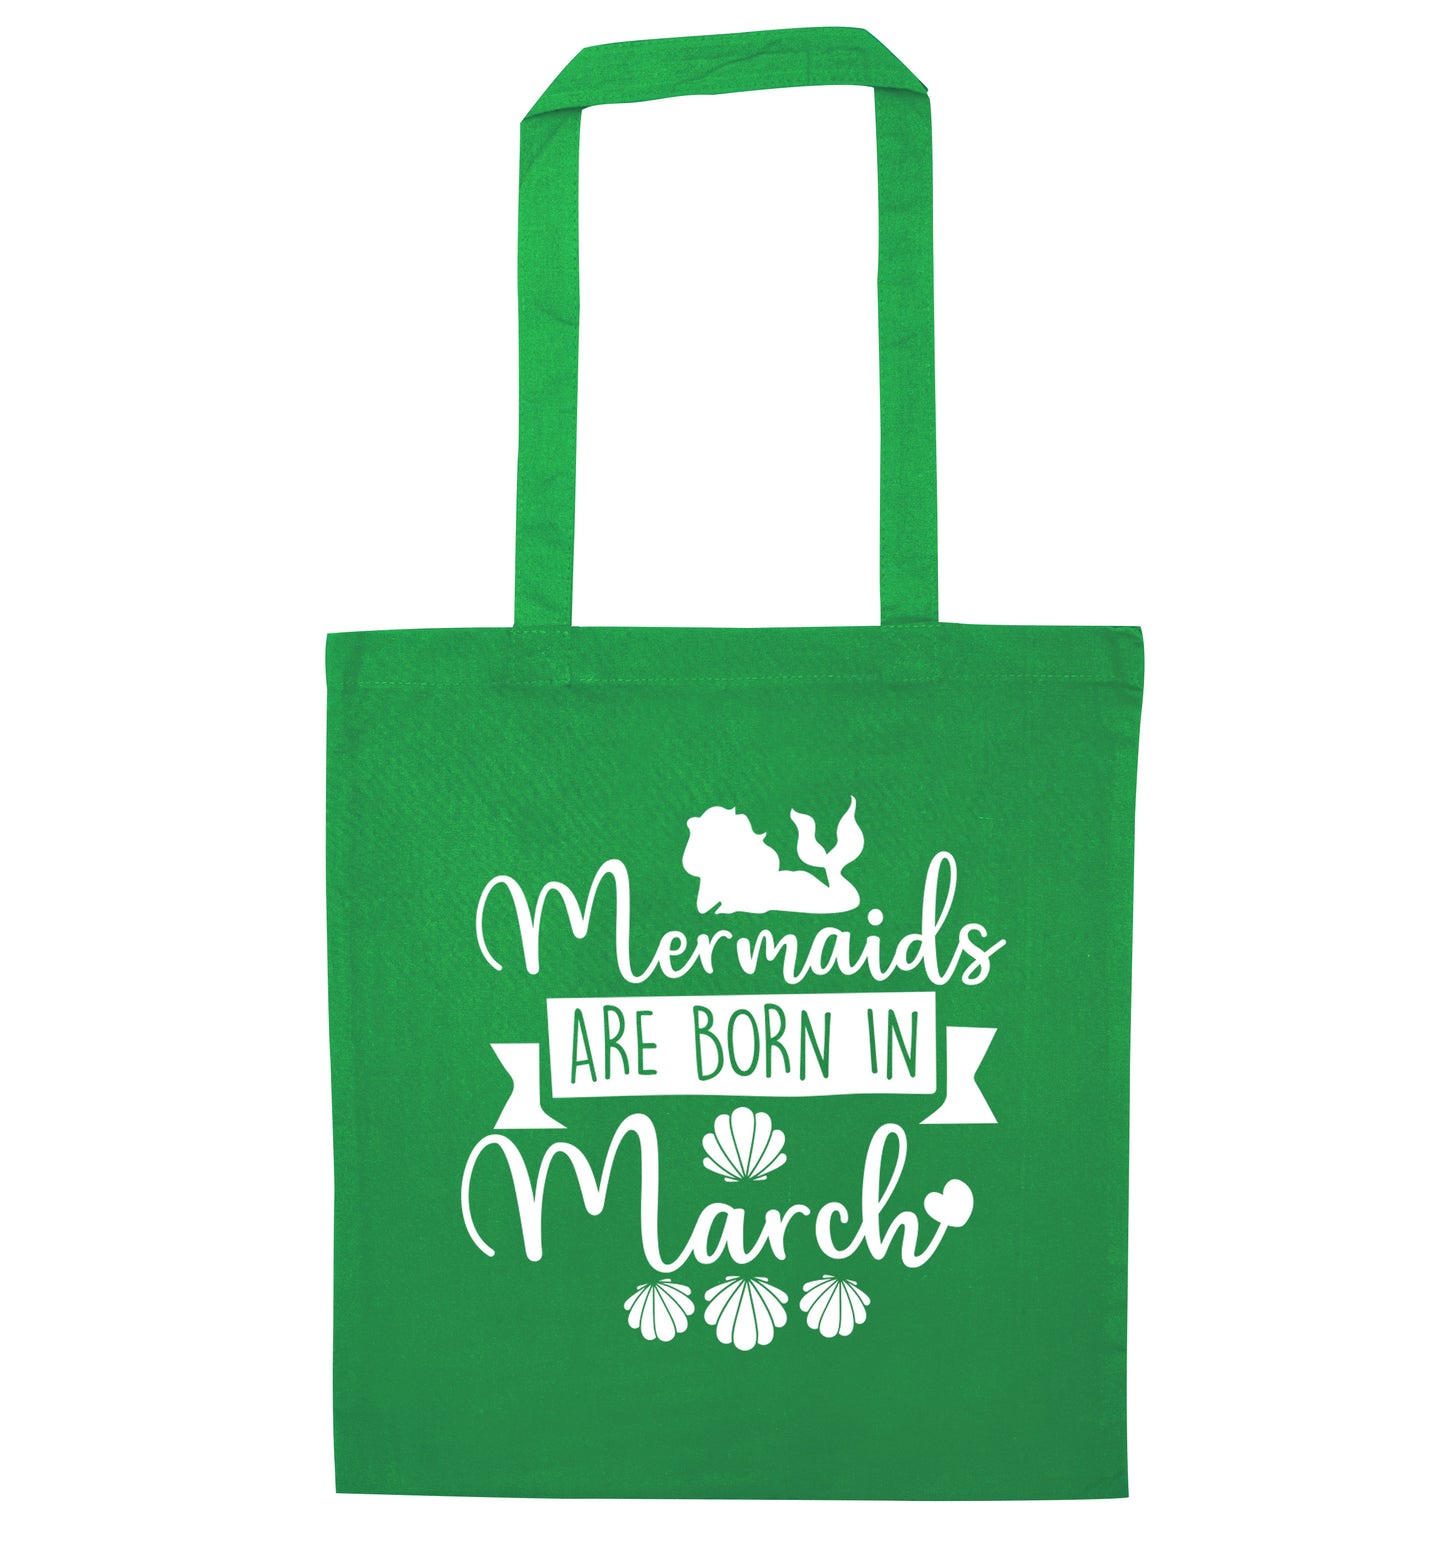 Mermaids are born in March green tote bag